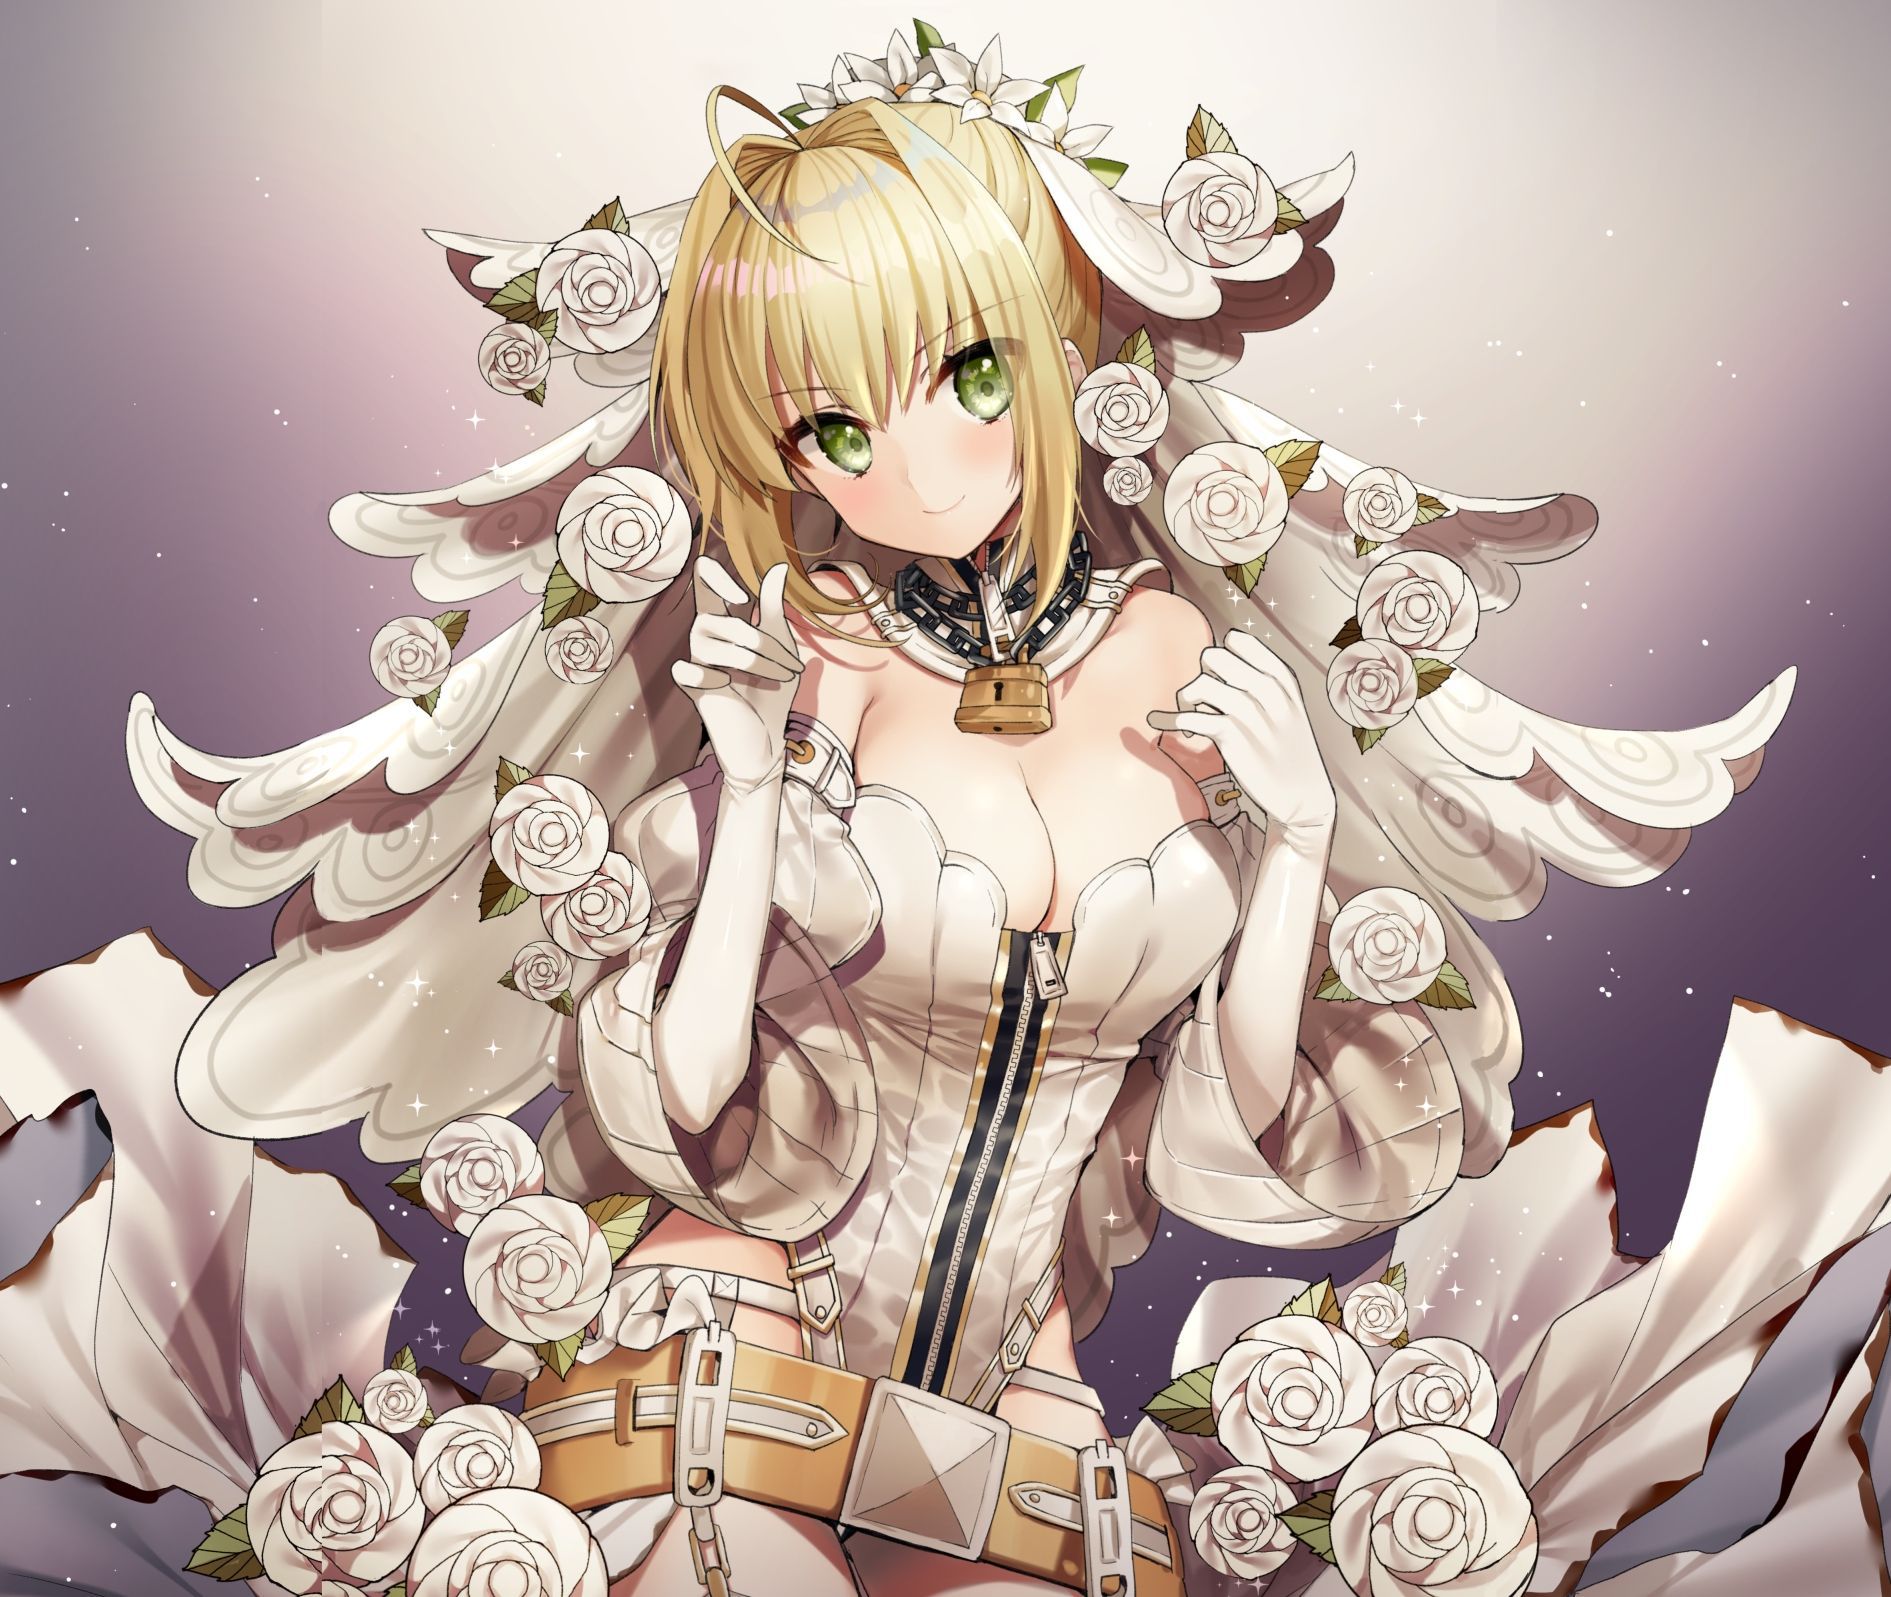 [Secondary ZIP] is about to start anime 100 pieces of cute image summary of Nero Claudius so soon 96